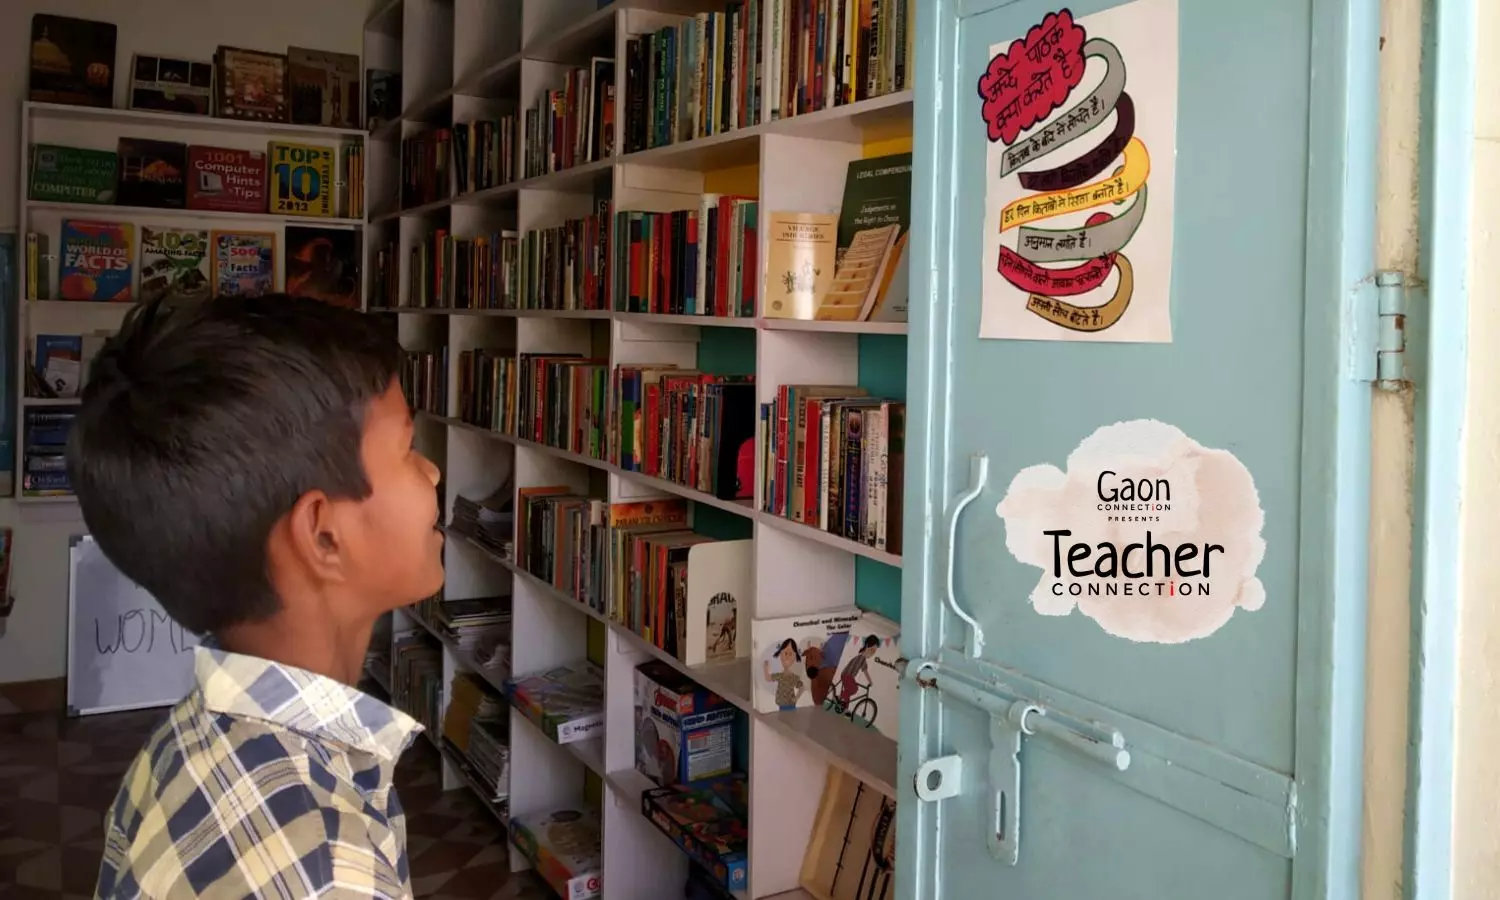 A 13-yo wants to eradicate dowry system, fight casteism — thanks to a community library